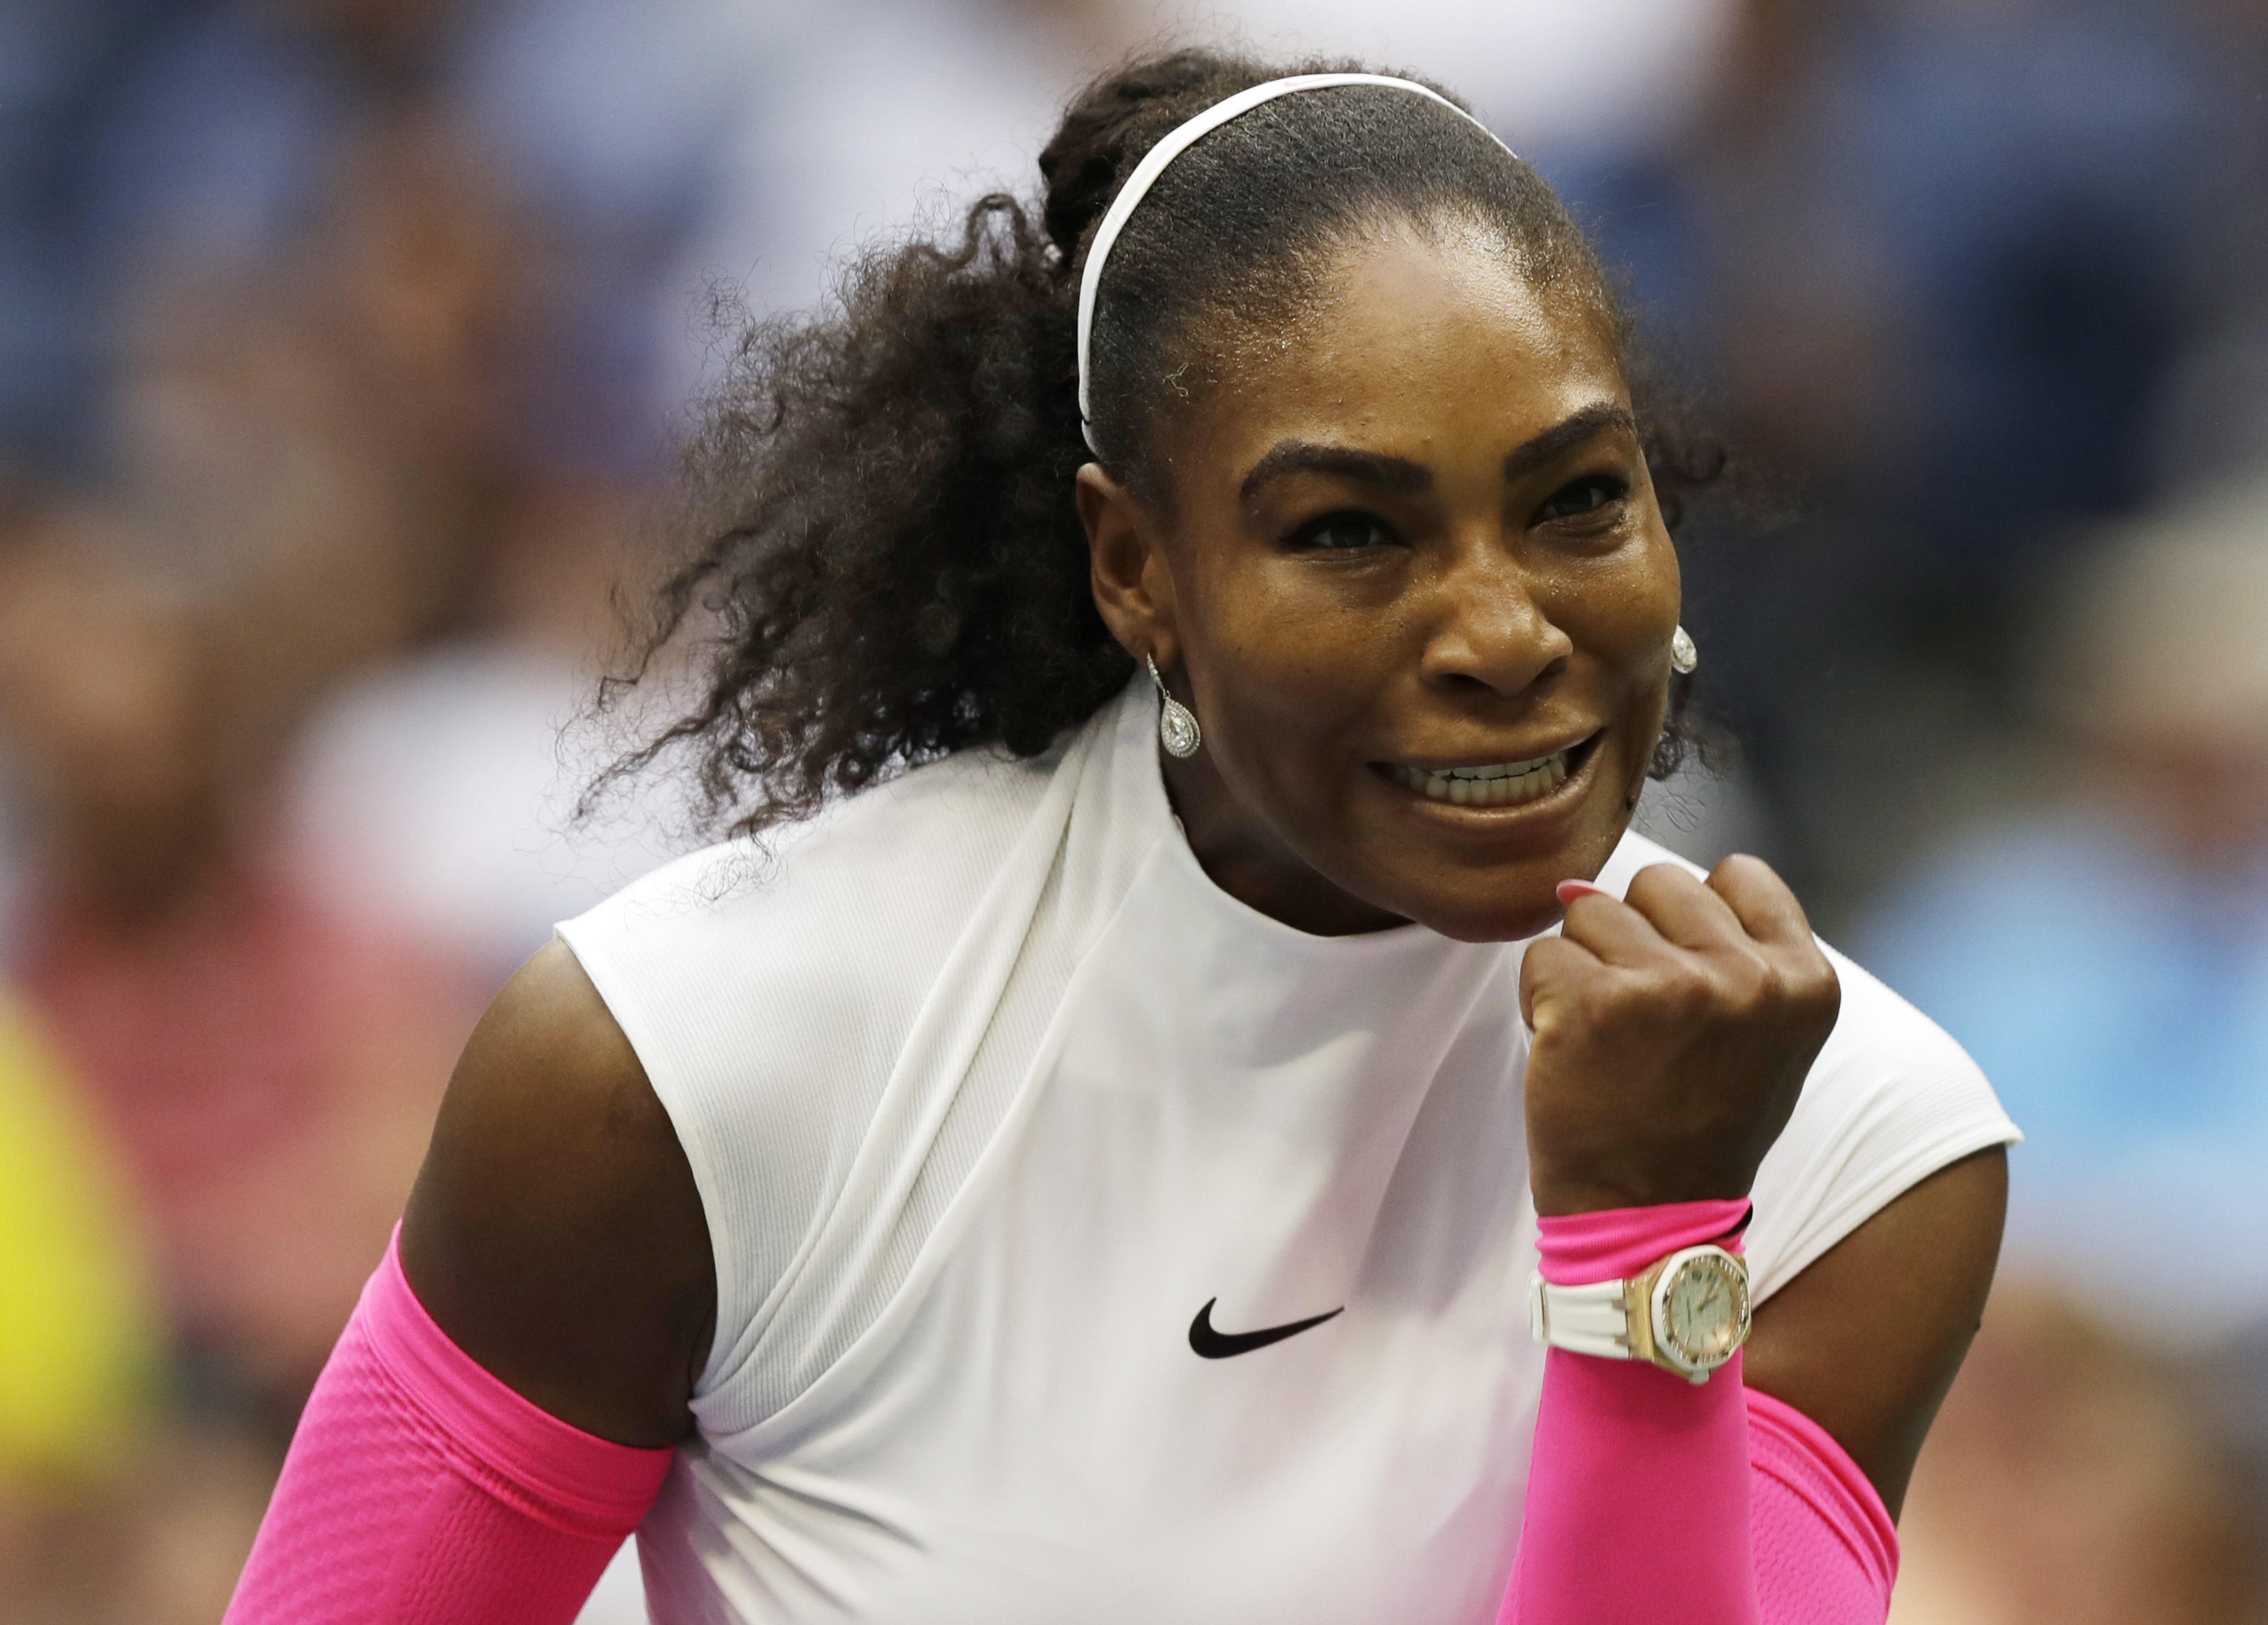 Serena Williams - The rise of tennis superstar Serena Williams - Pictures - CBS News3188 x 2284